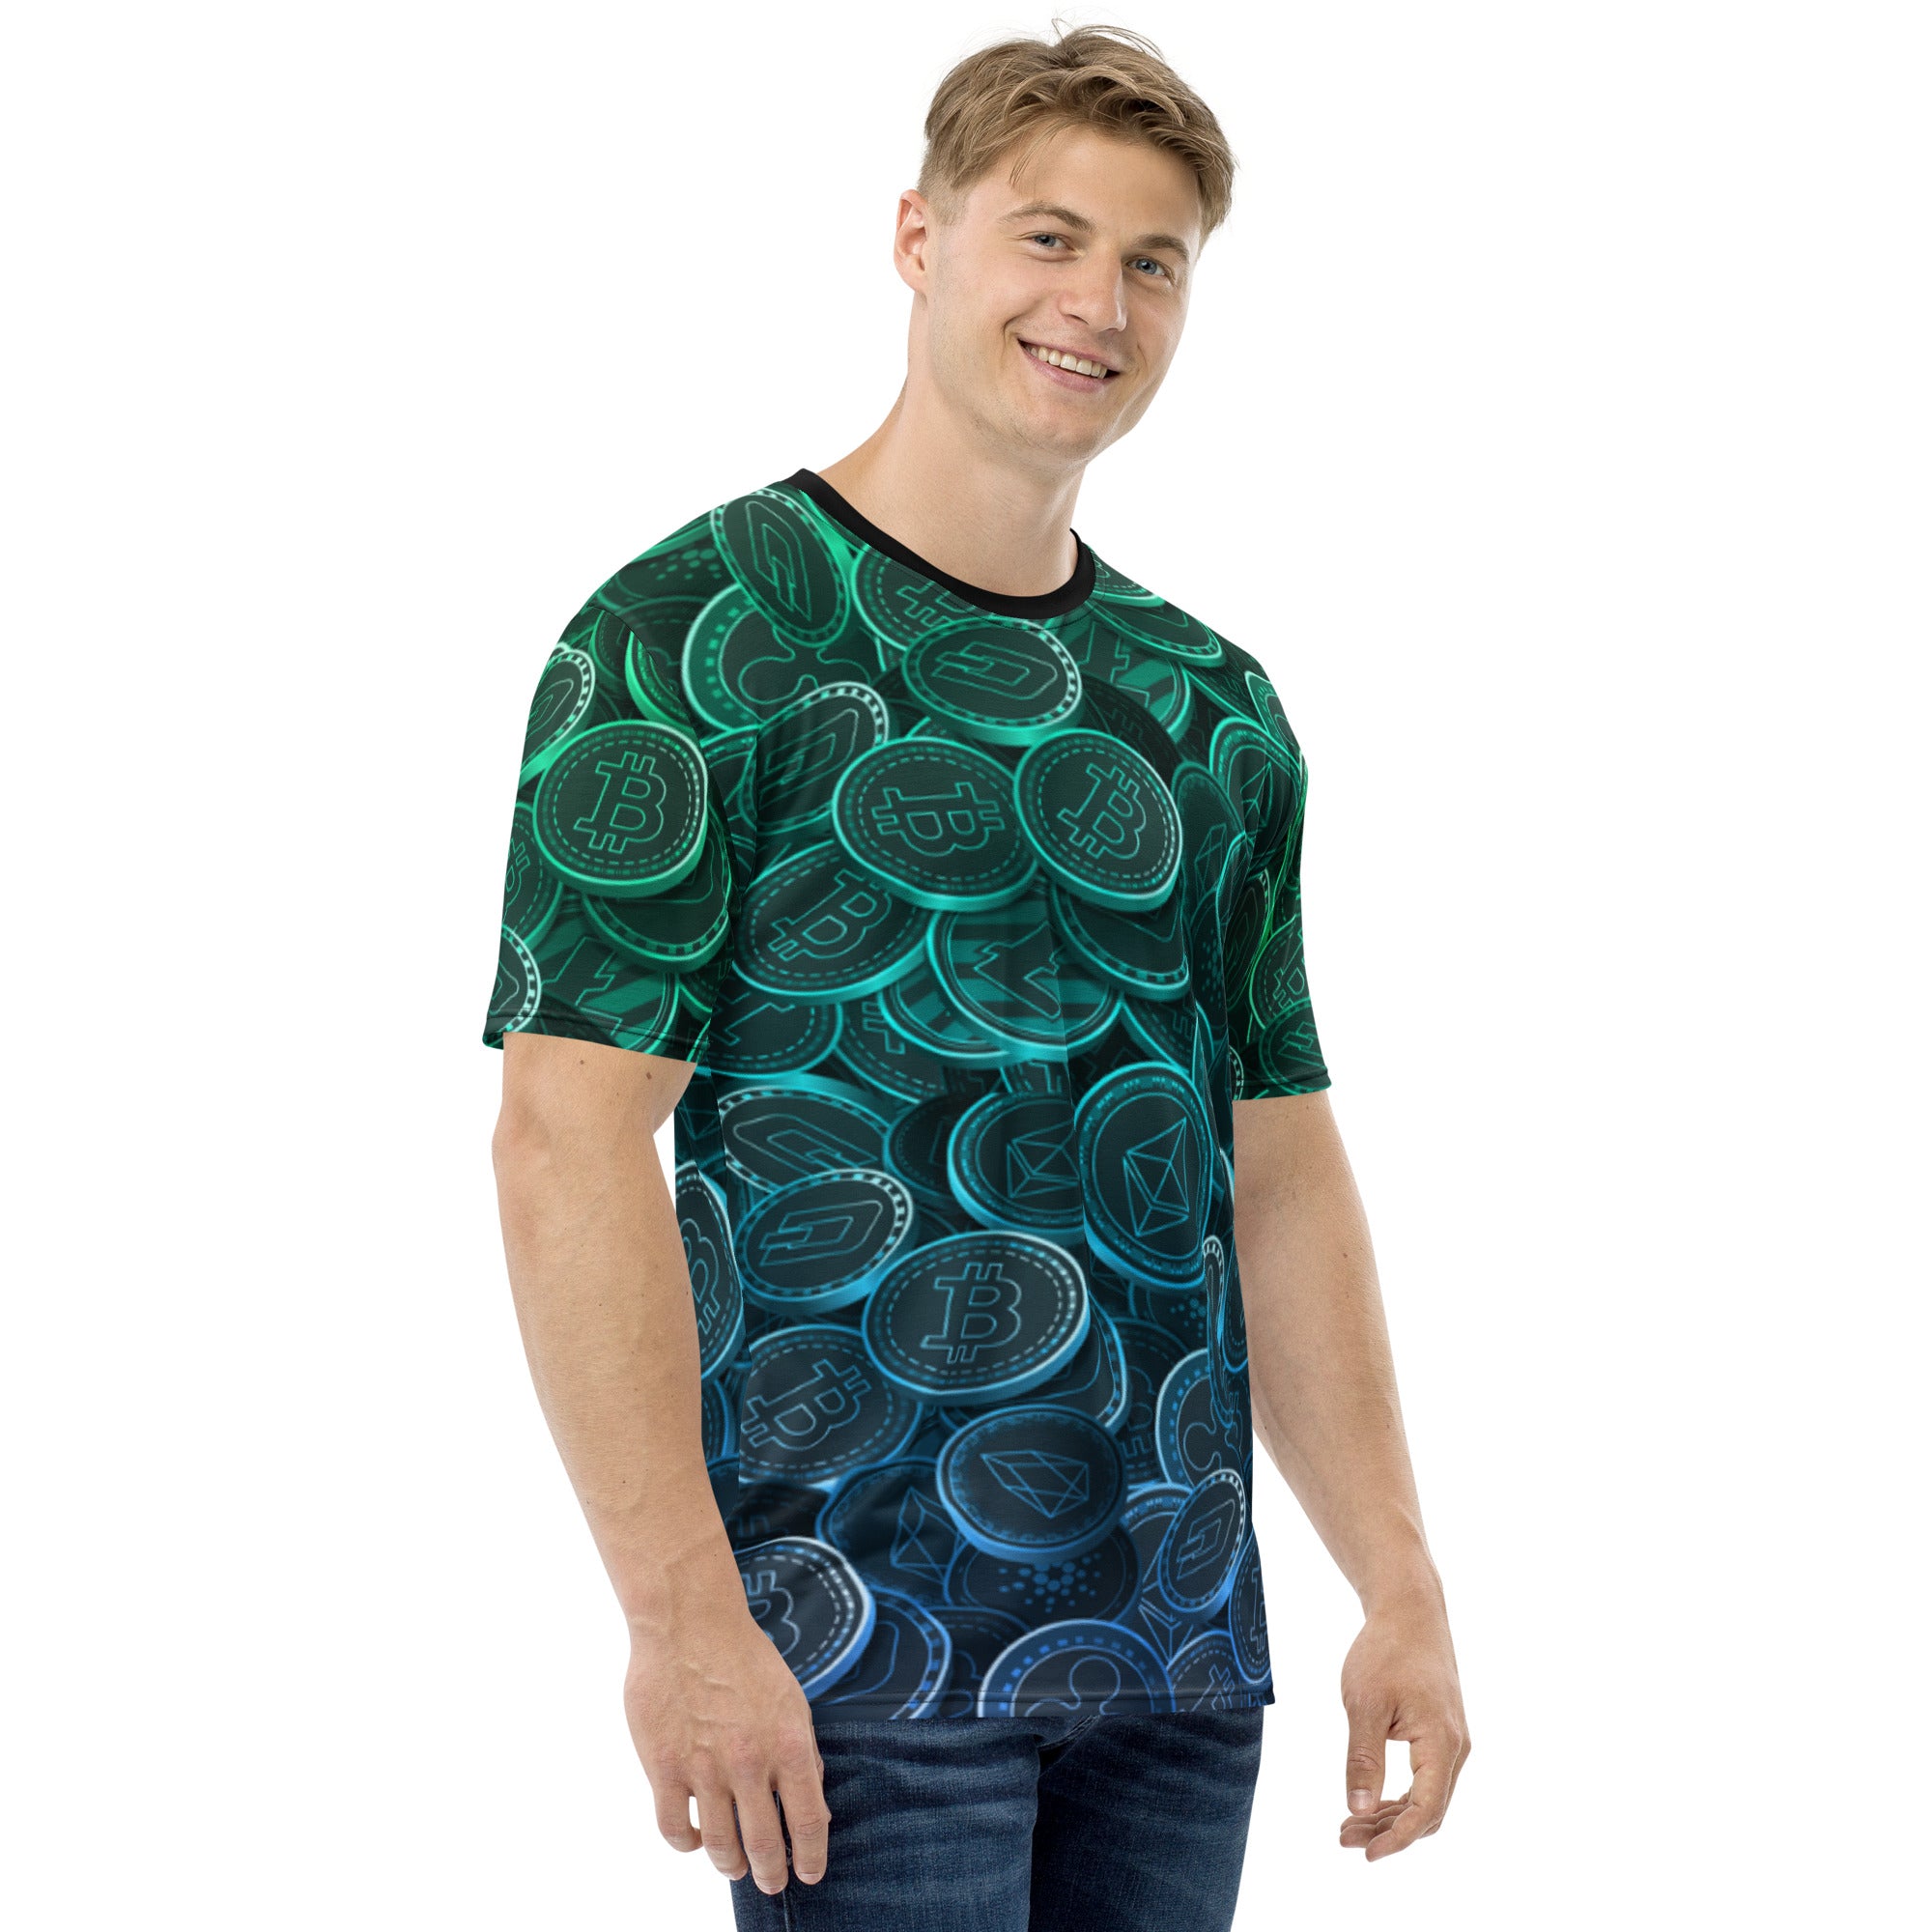 Crypto Coins All Over Print T-Shirt - CRYPTOPRNR®